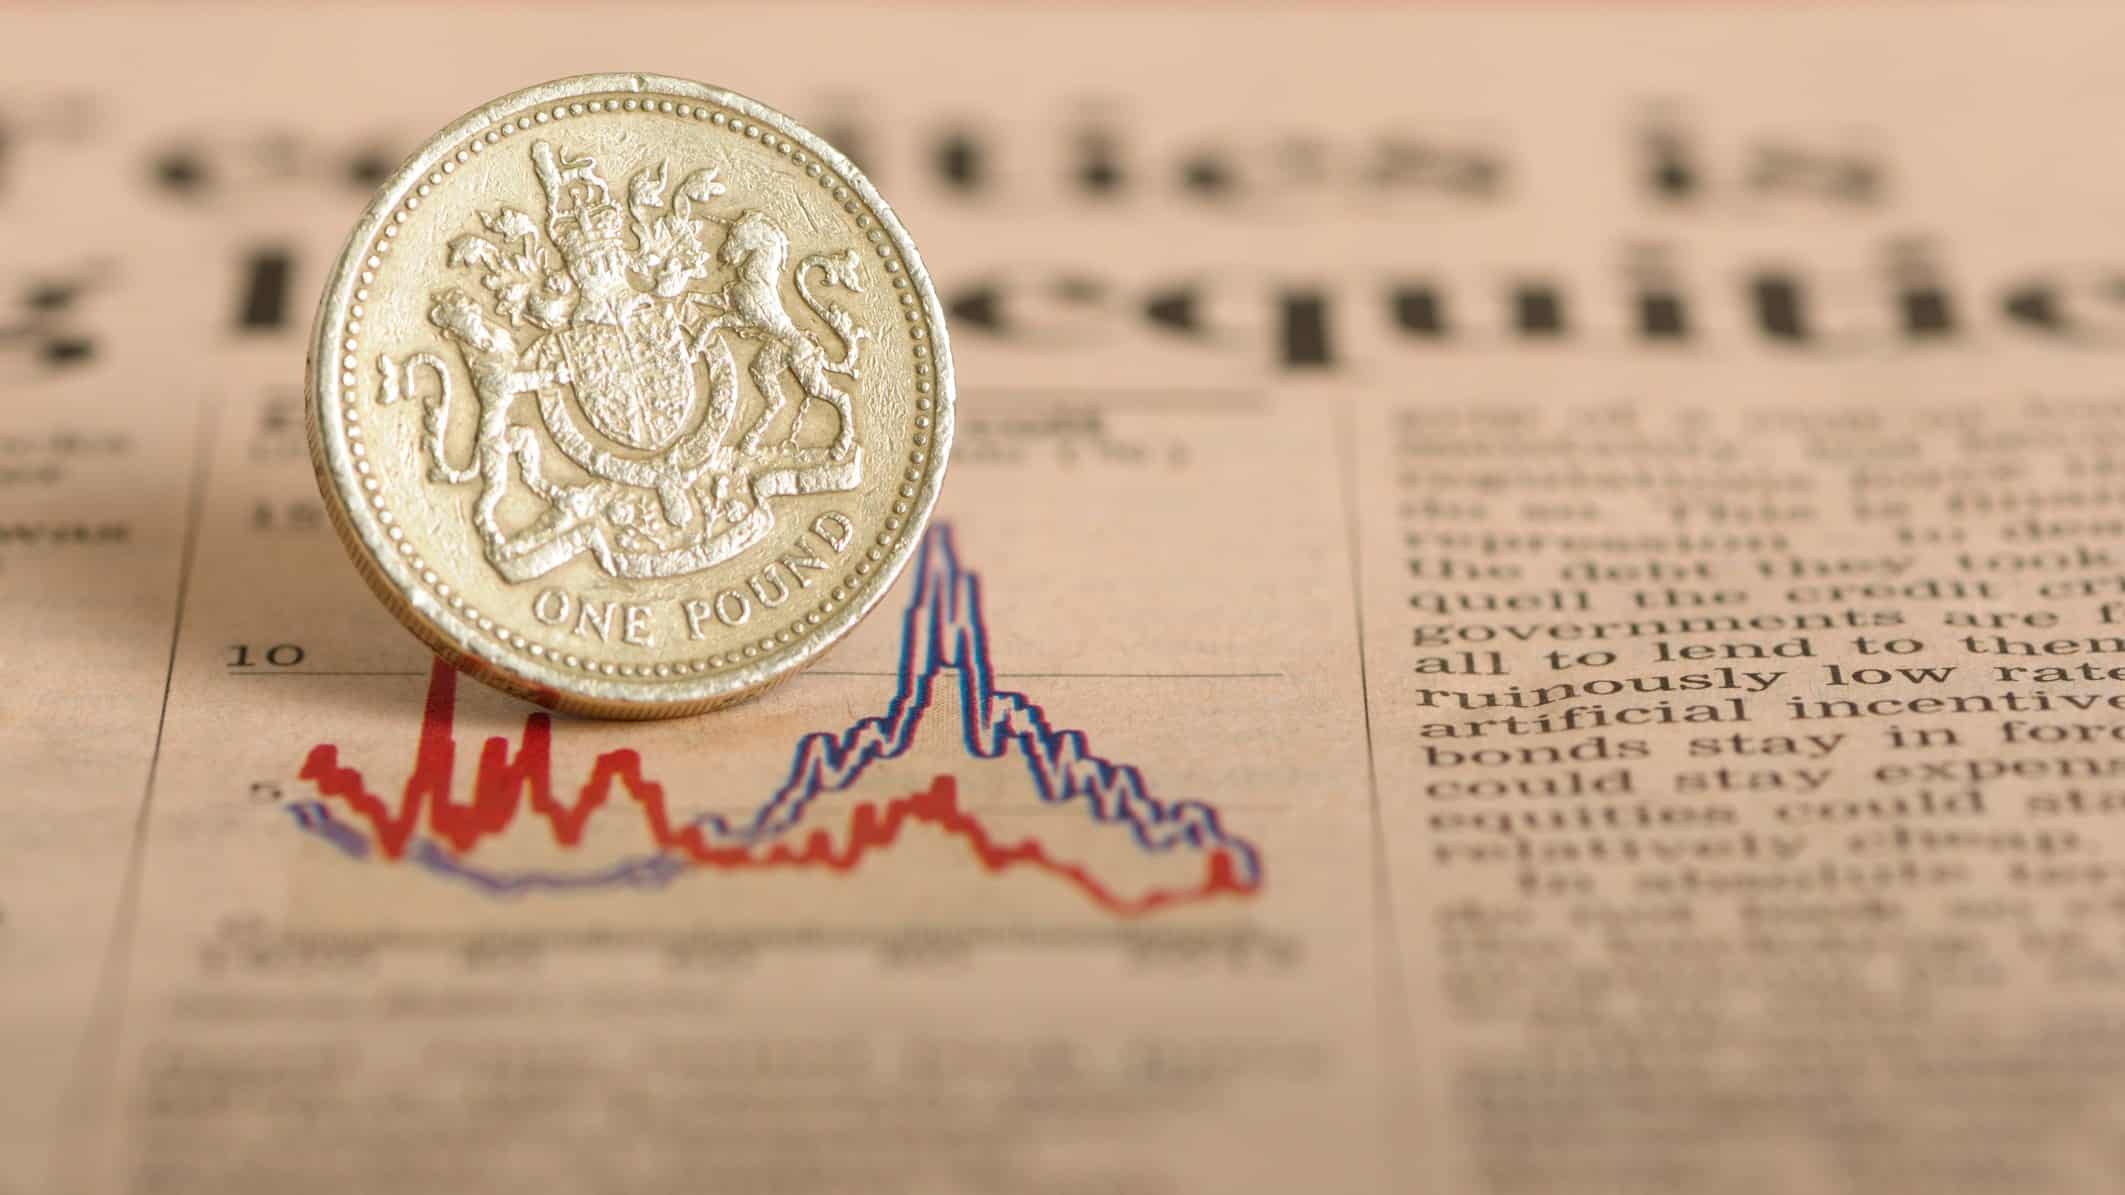 As the FTSE 100 nears record highs, can I profit?